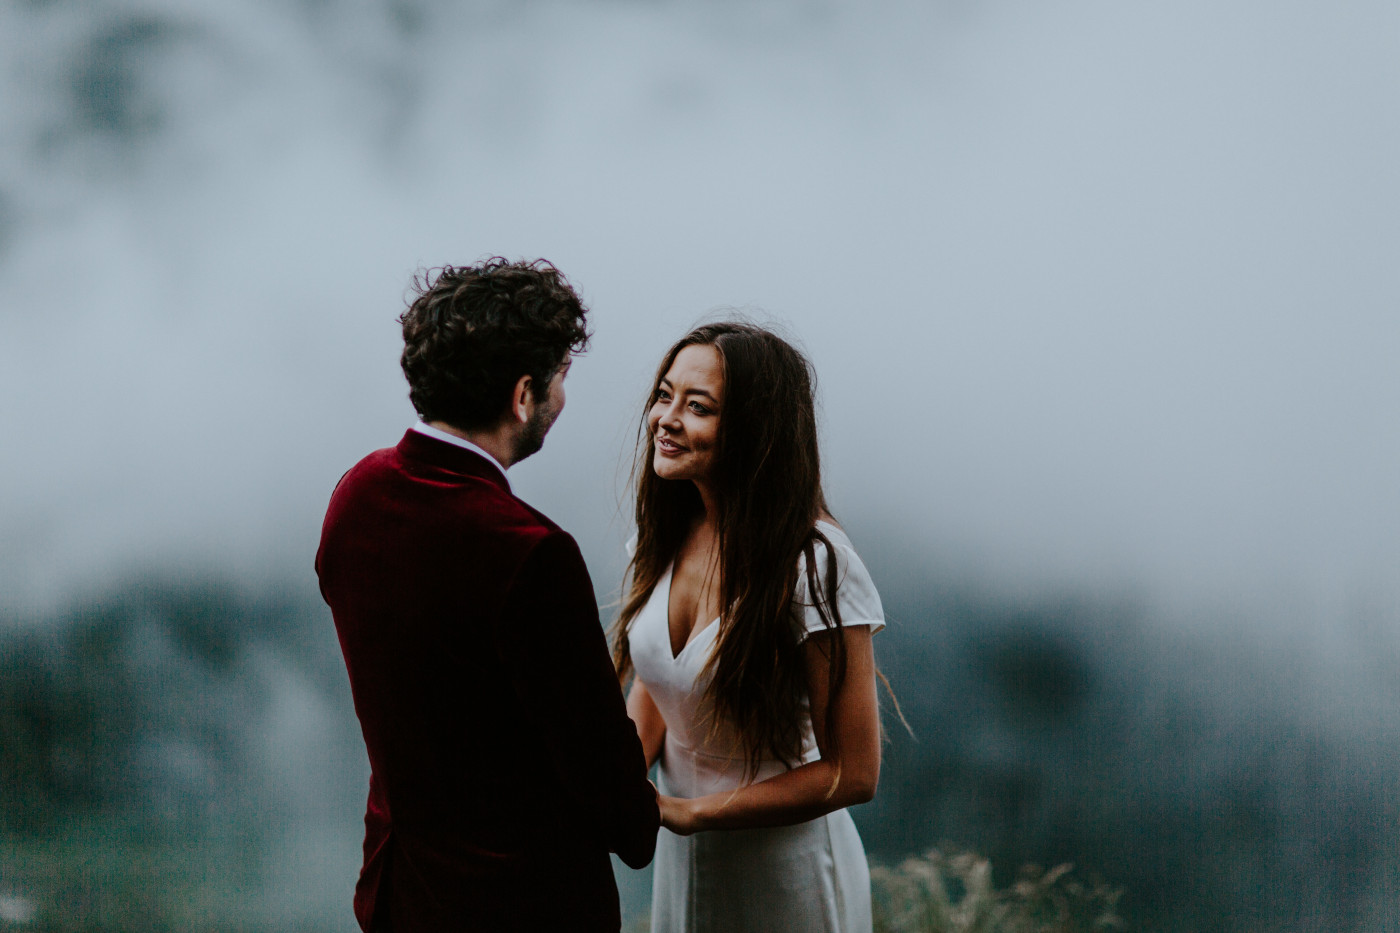 Katelyn smiles at Murray in front of the clouds. Elopement wedding photography at Mount Hood by Sienna Plus Josh.